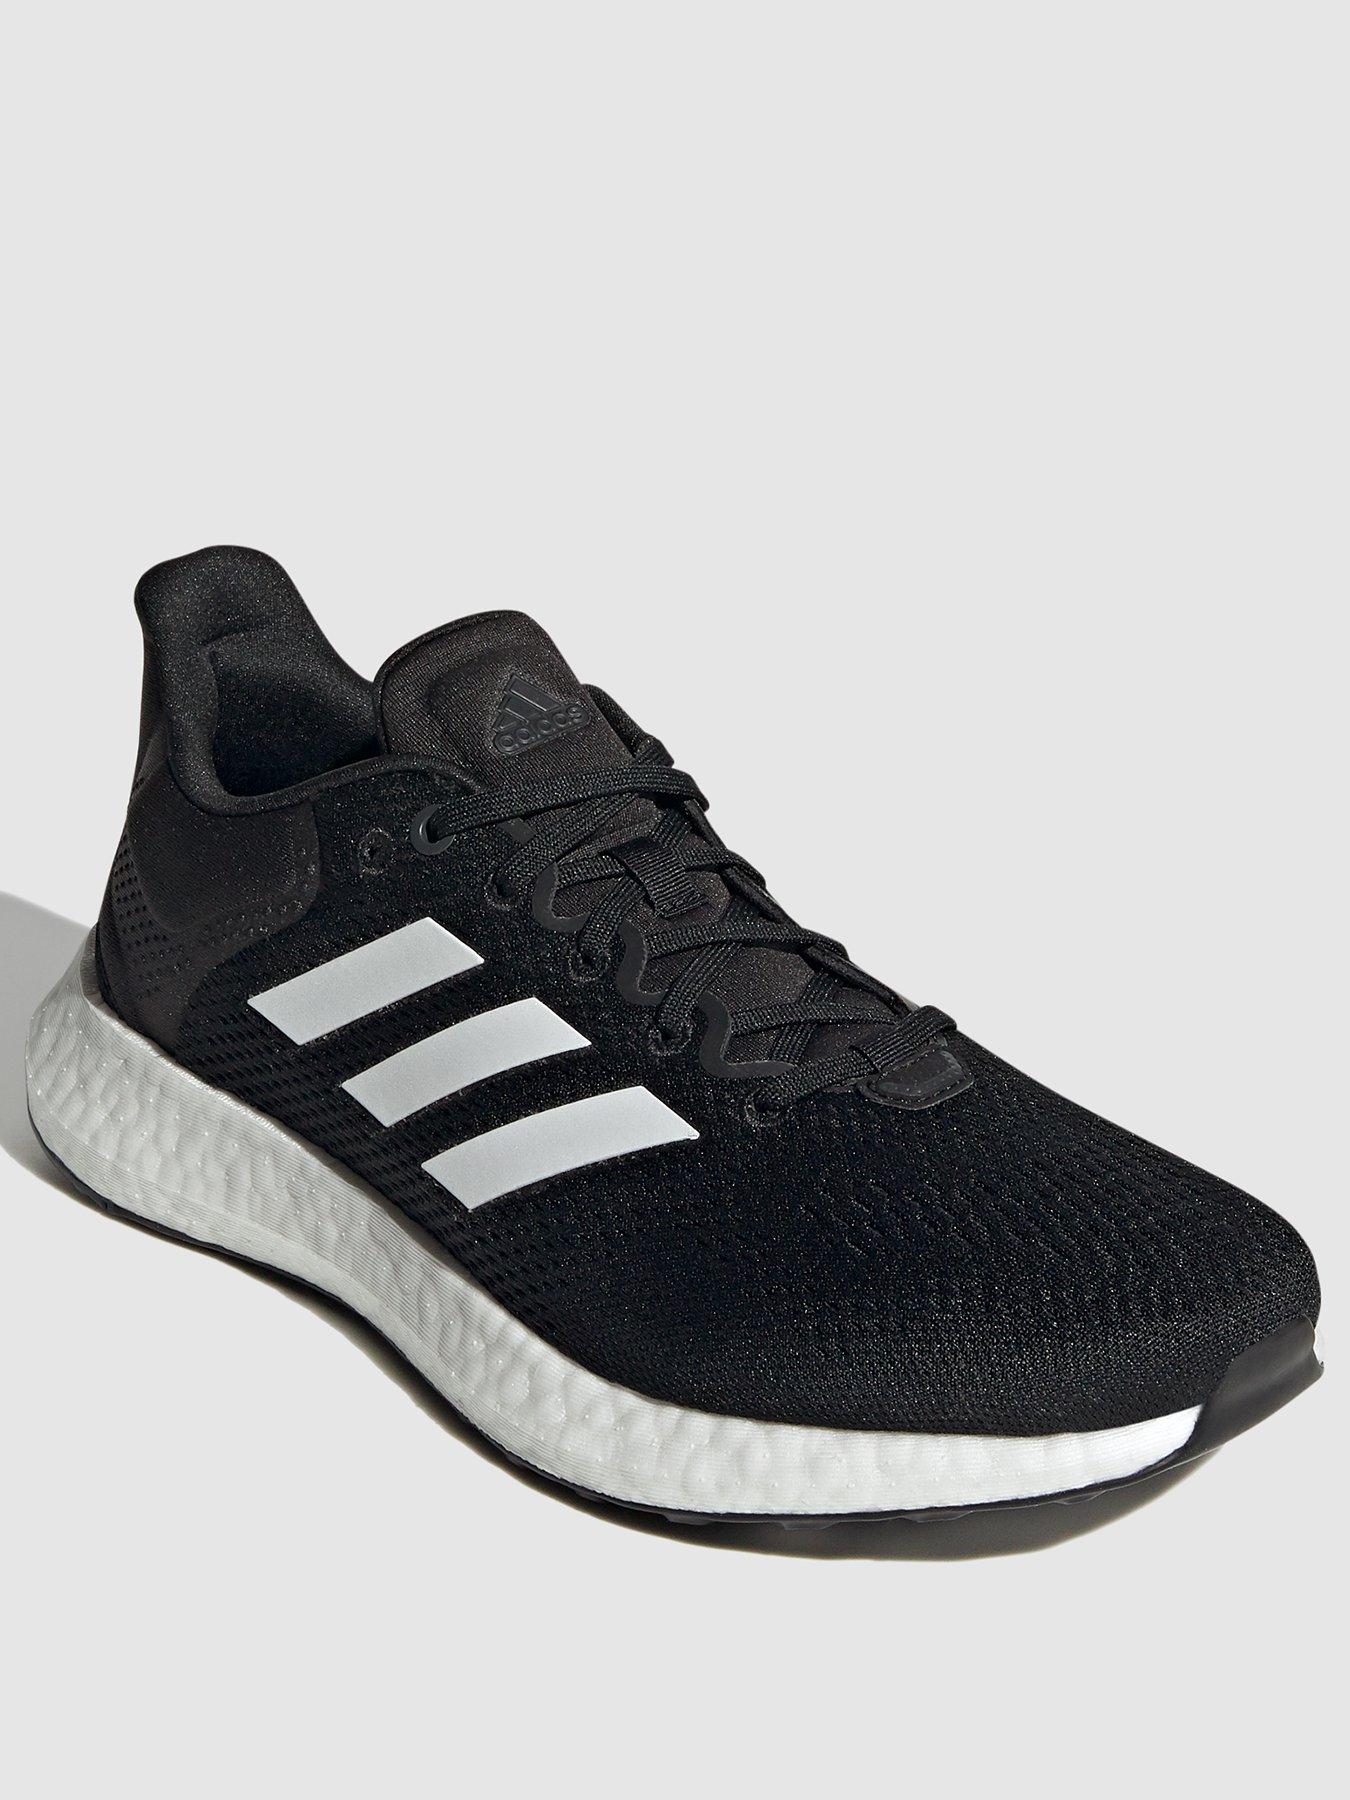 Trainers Pureboost 21 Running Shoes - Black/White